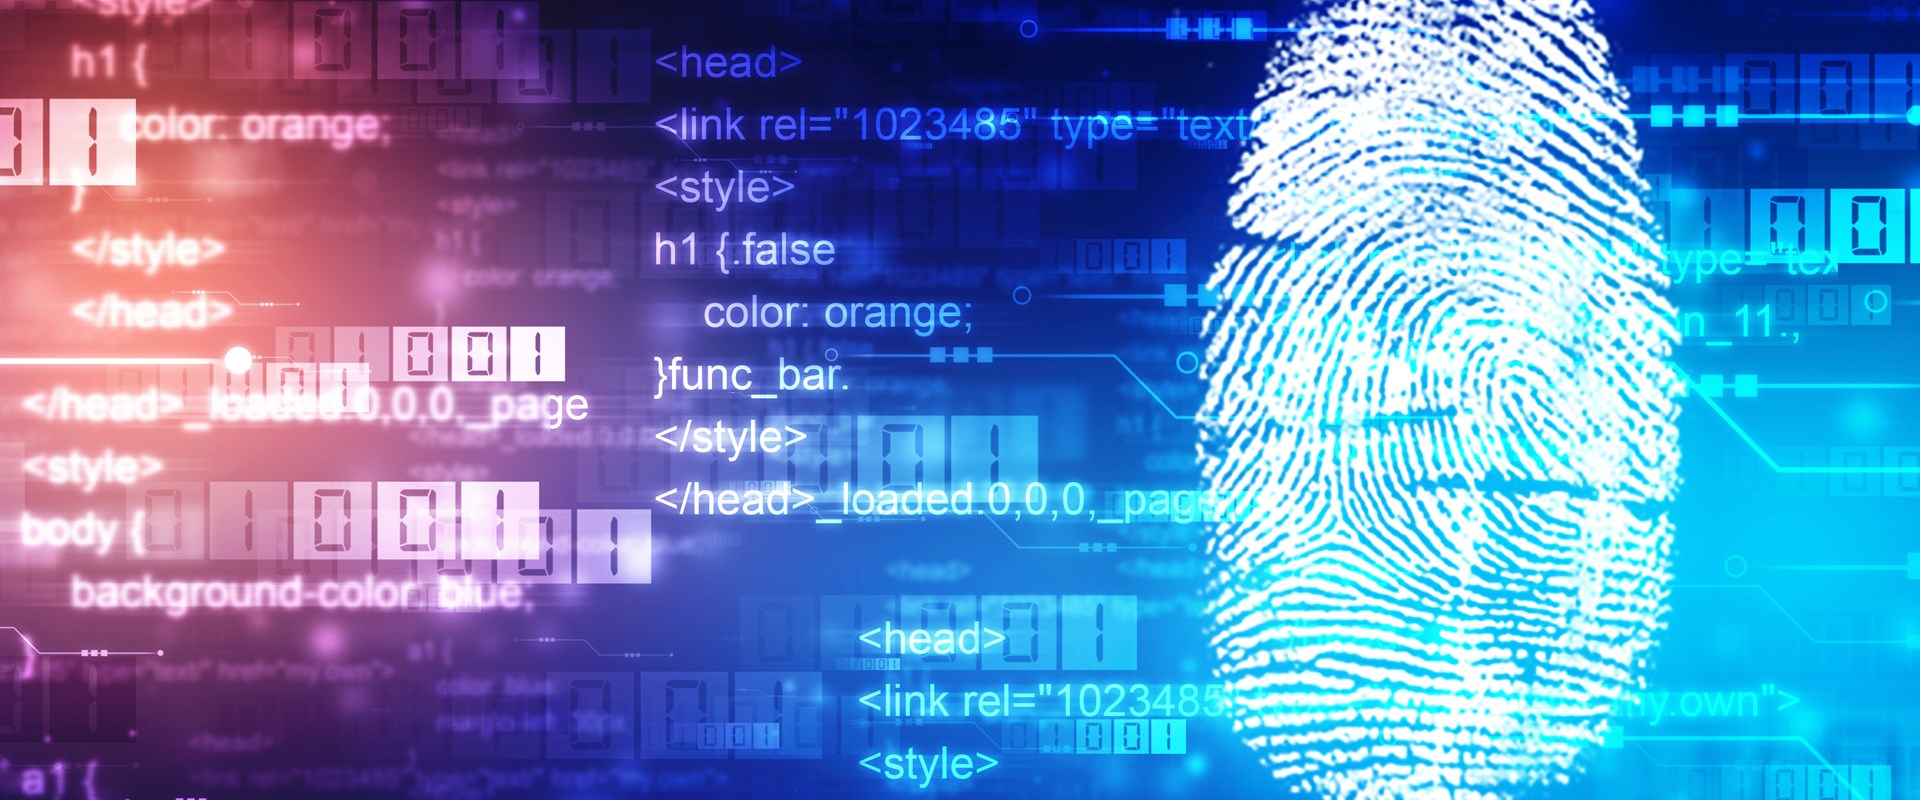 A picture of a finger print against a digital background of data